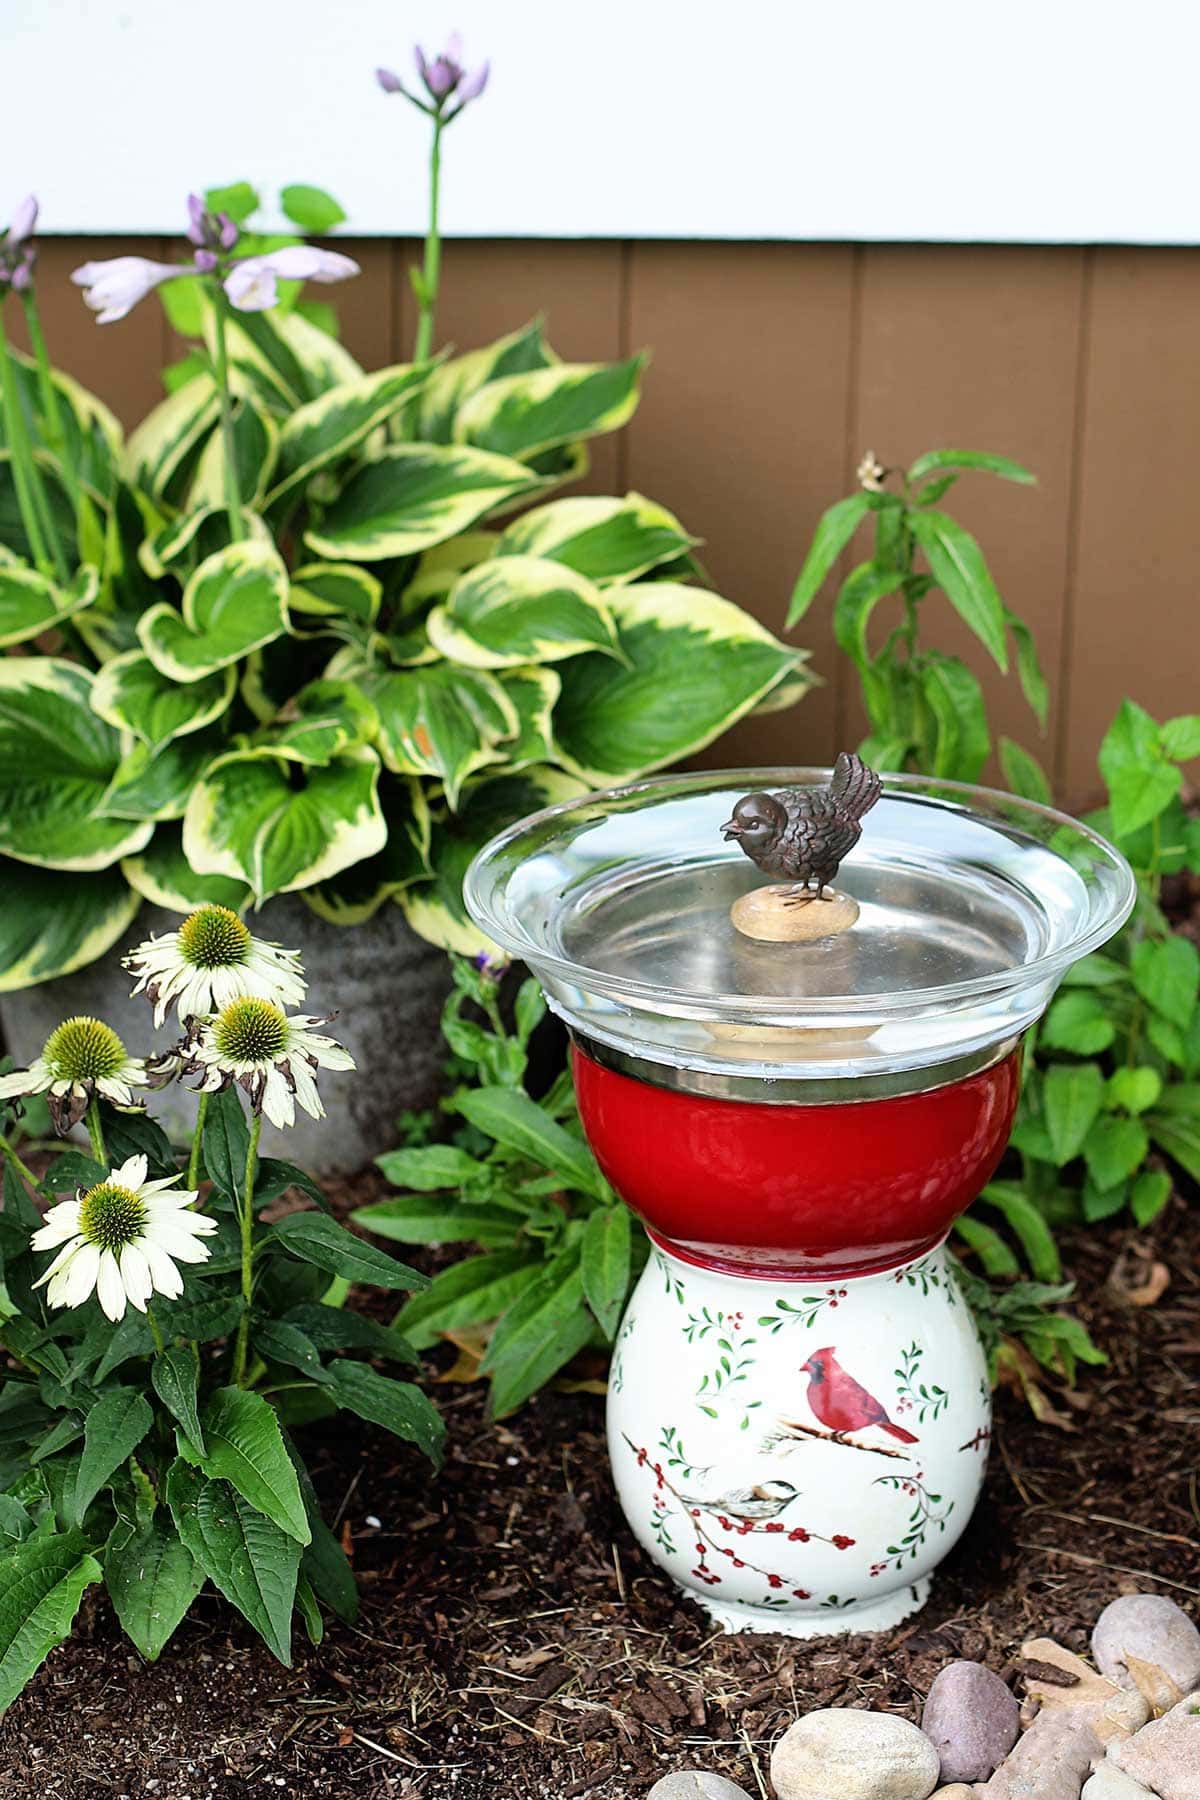 upcycled bird bath from glassware